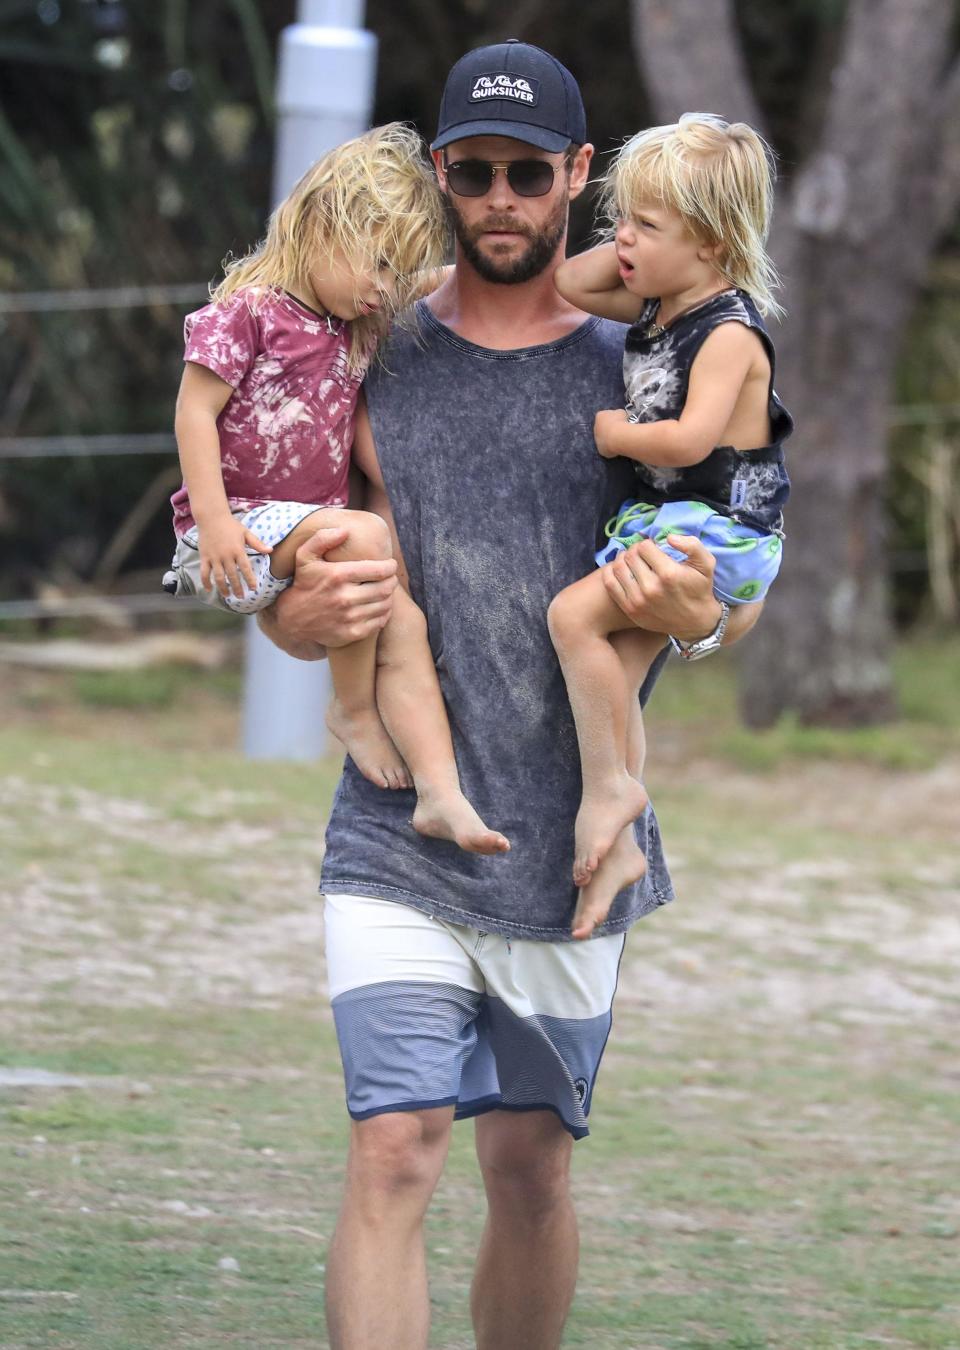 Hot dad alert: Chris Hemsworth and twins enjoy a boy's day out